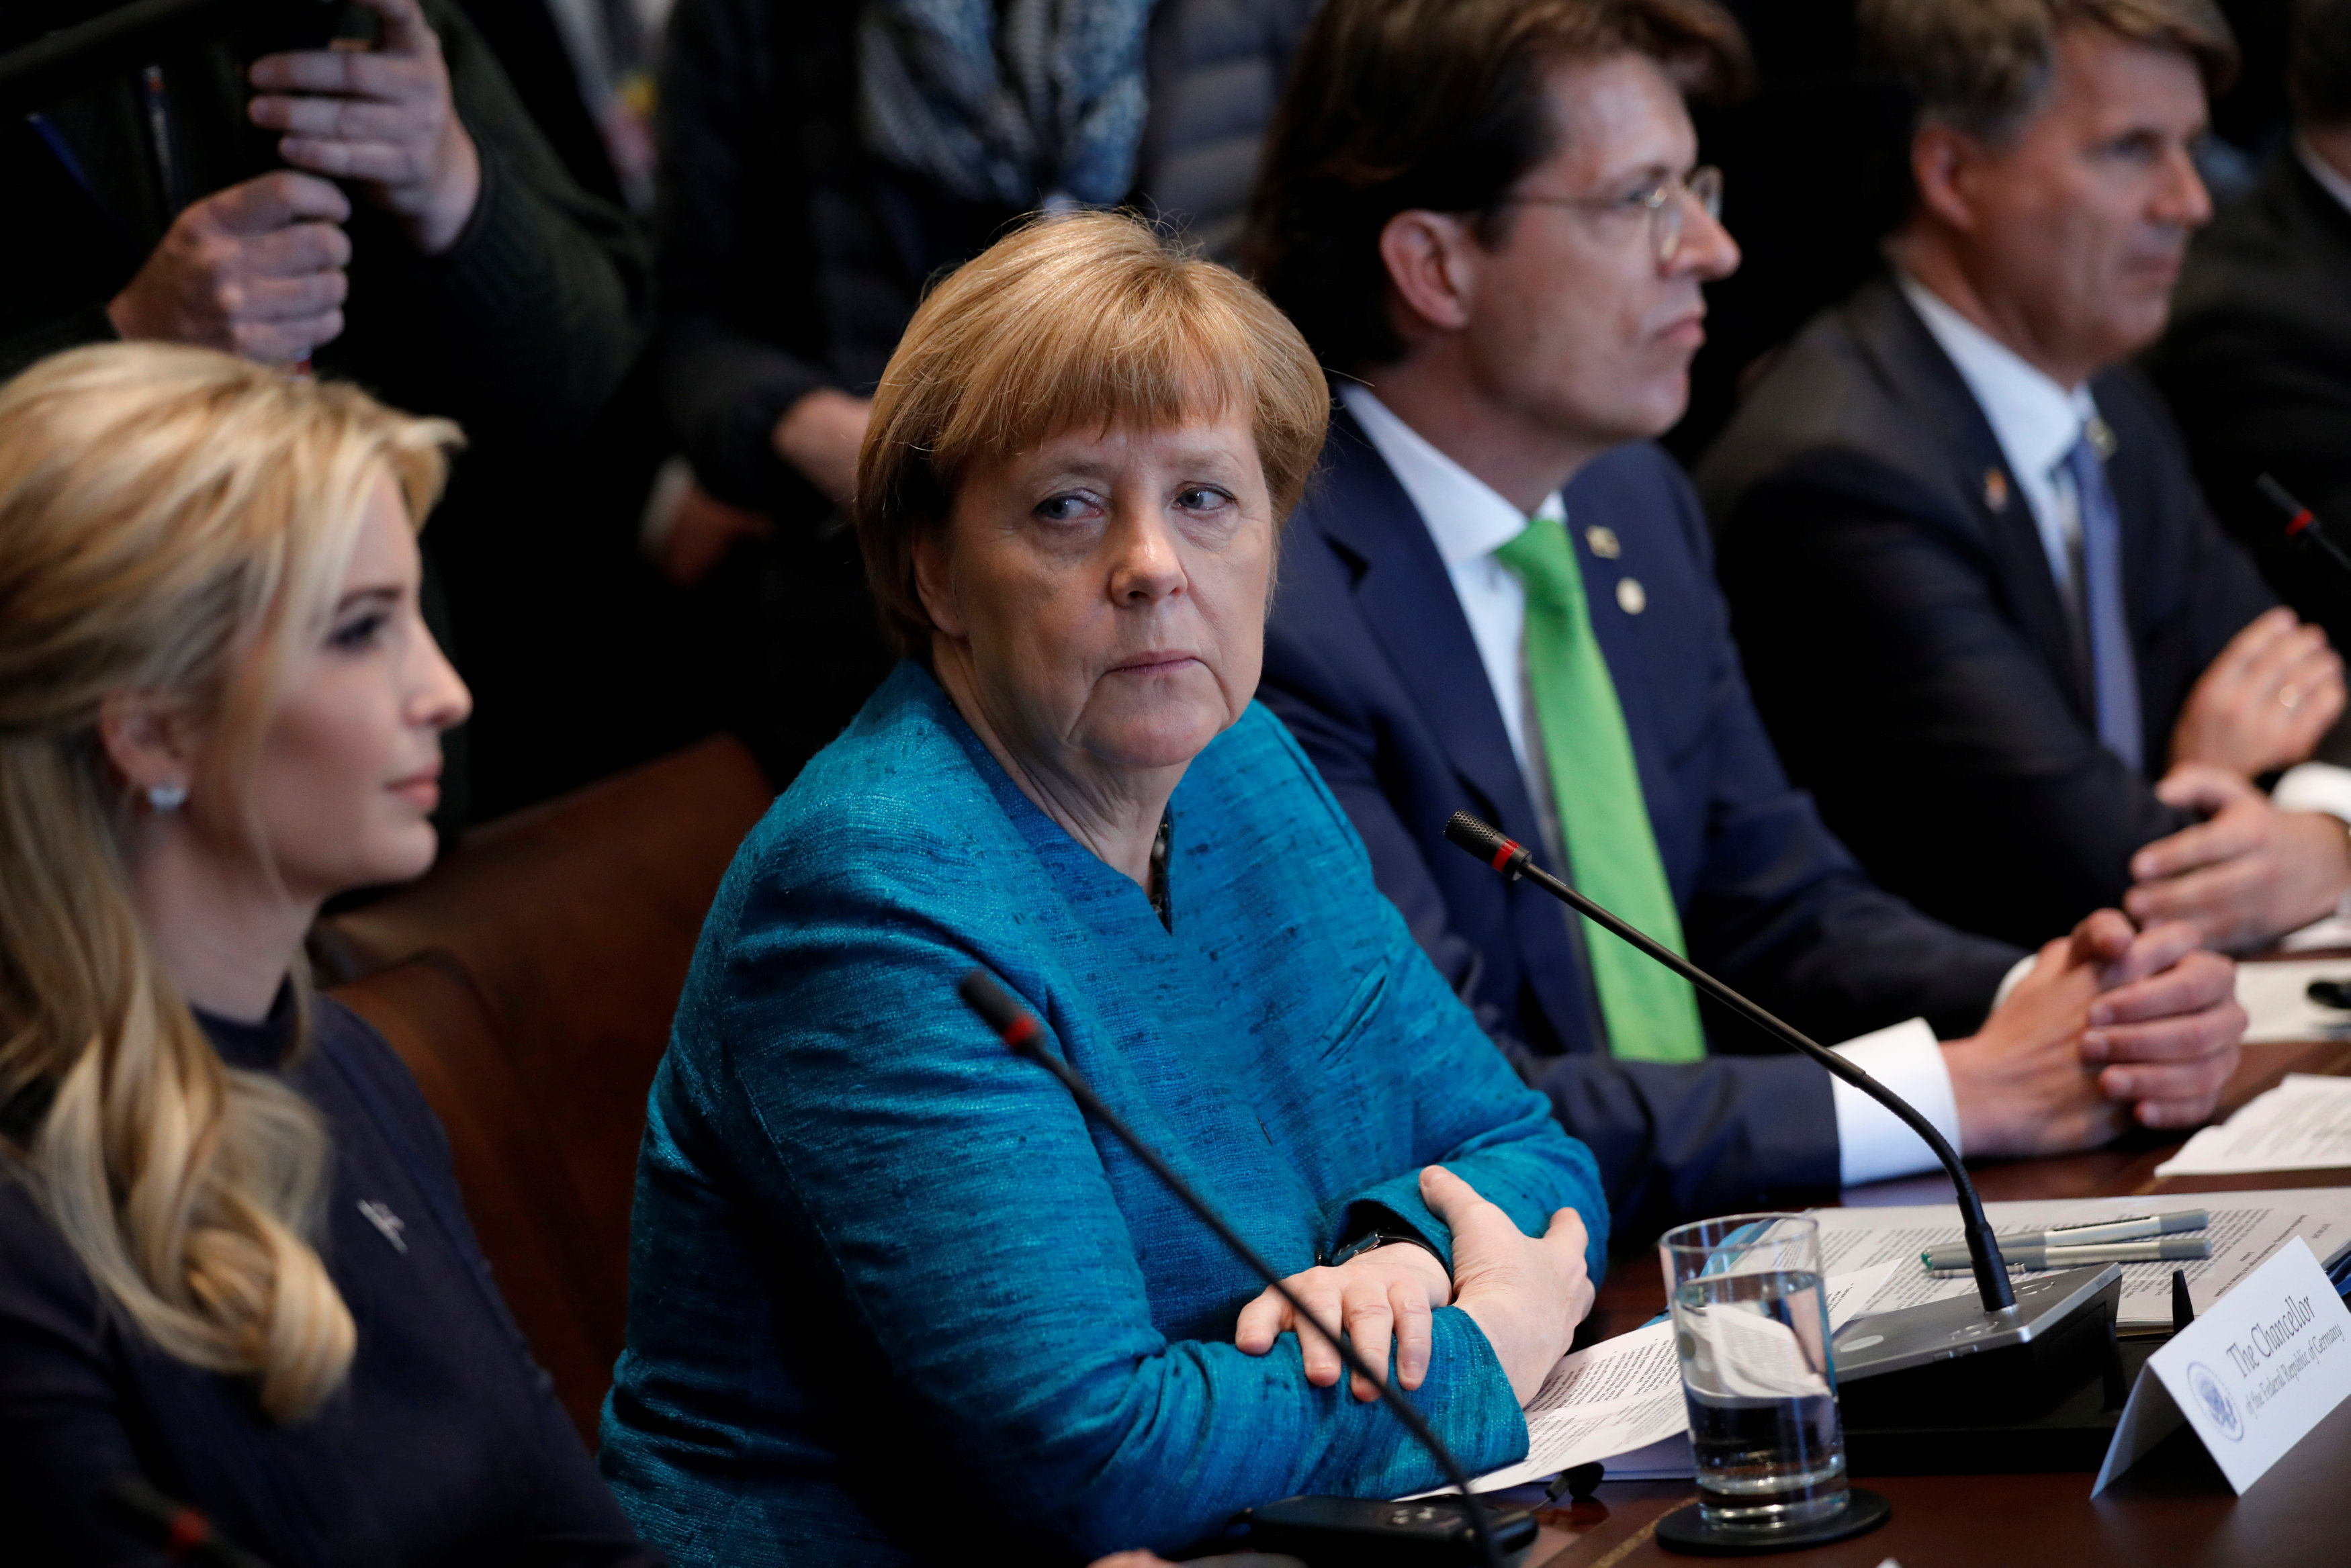 Germany's Chancellor Angela Merkel, flanked by Ivanka Trump and Schaeffler CEO Klaus Rosenfeld (3rd L), participates in a roundtable with U.S. President Donald Trump and German and U.S. business leaders at the White House in Washington, U.S. March 17, 2017. REUTERS/Jonathan Ernst